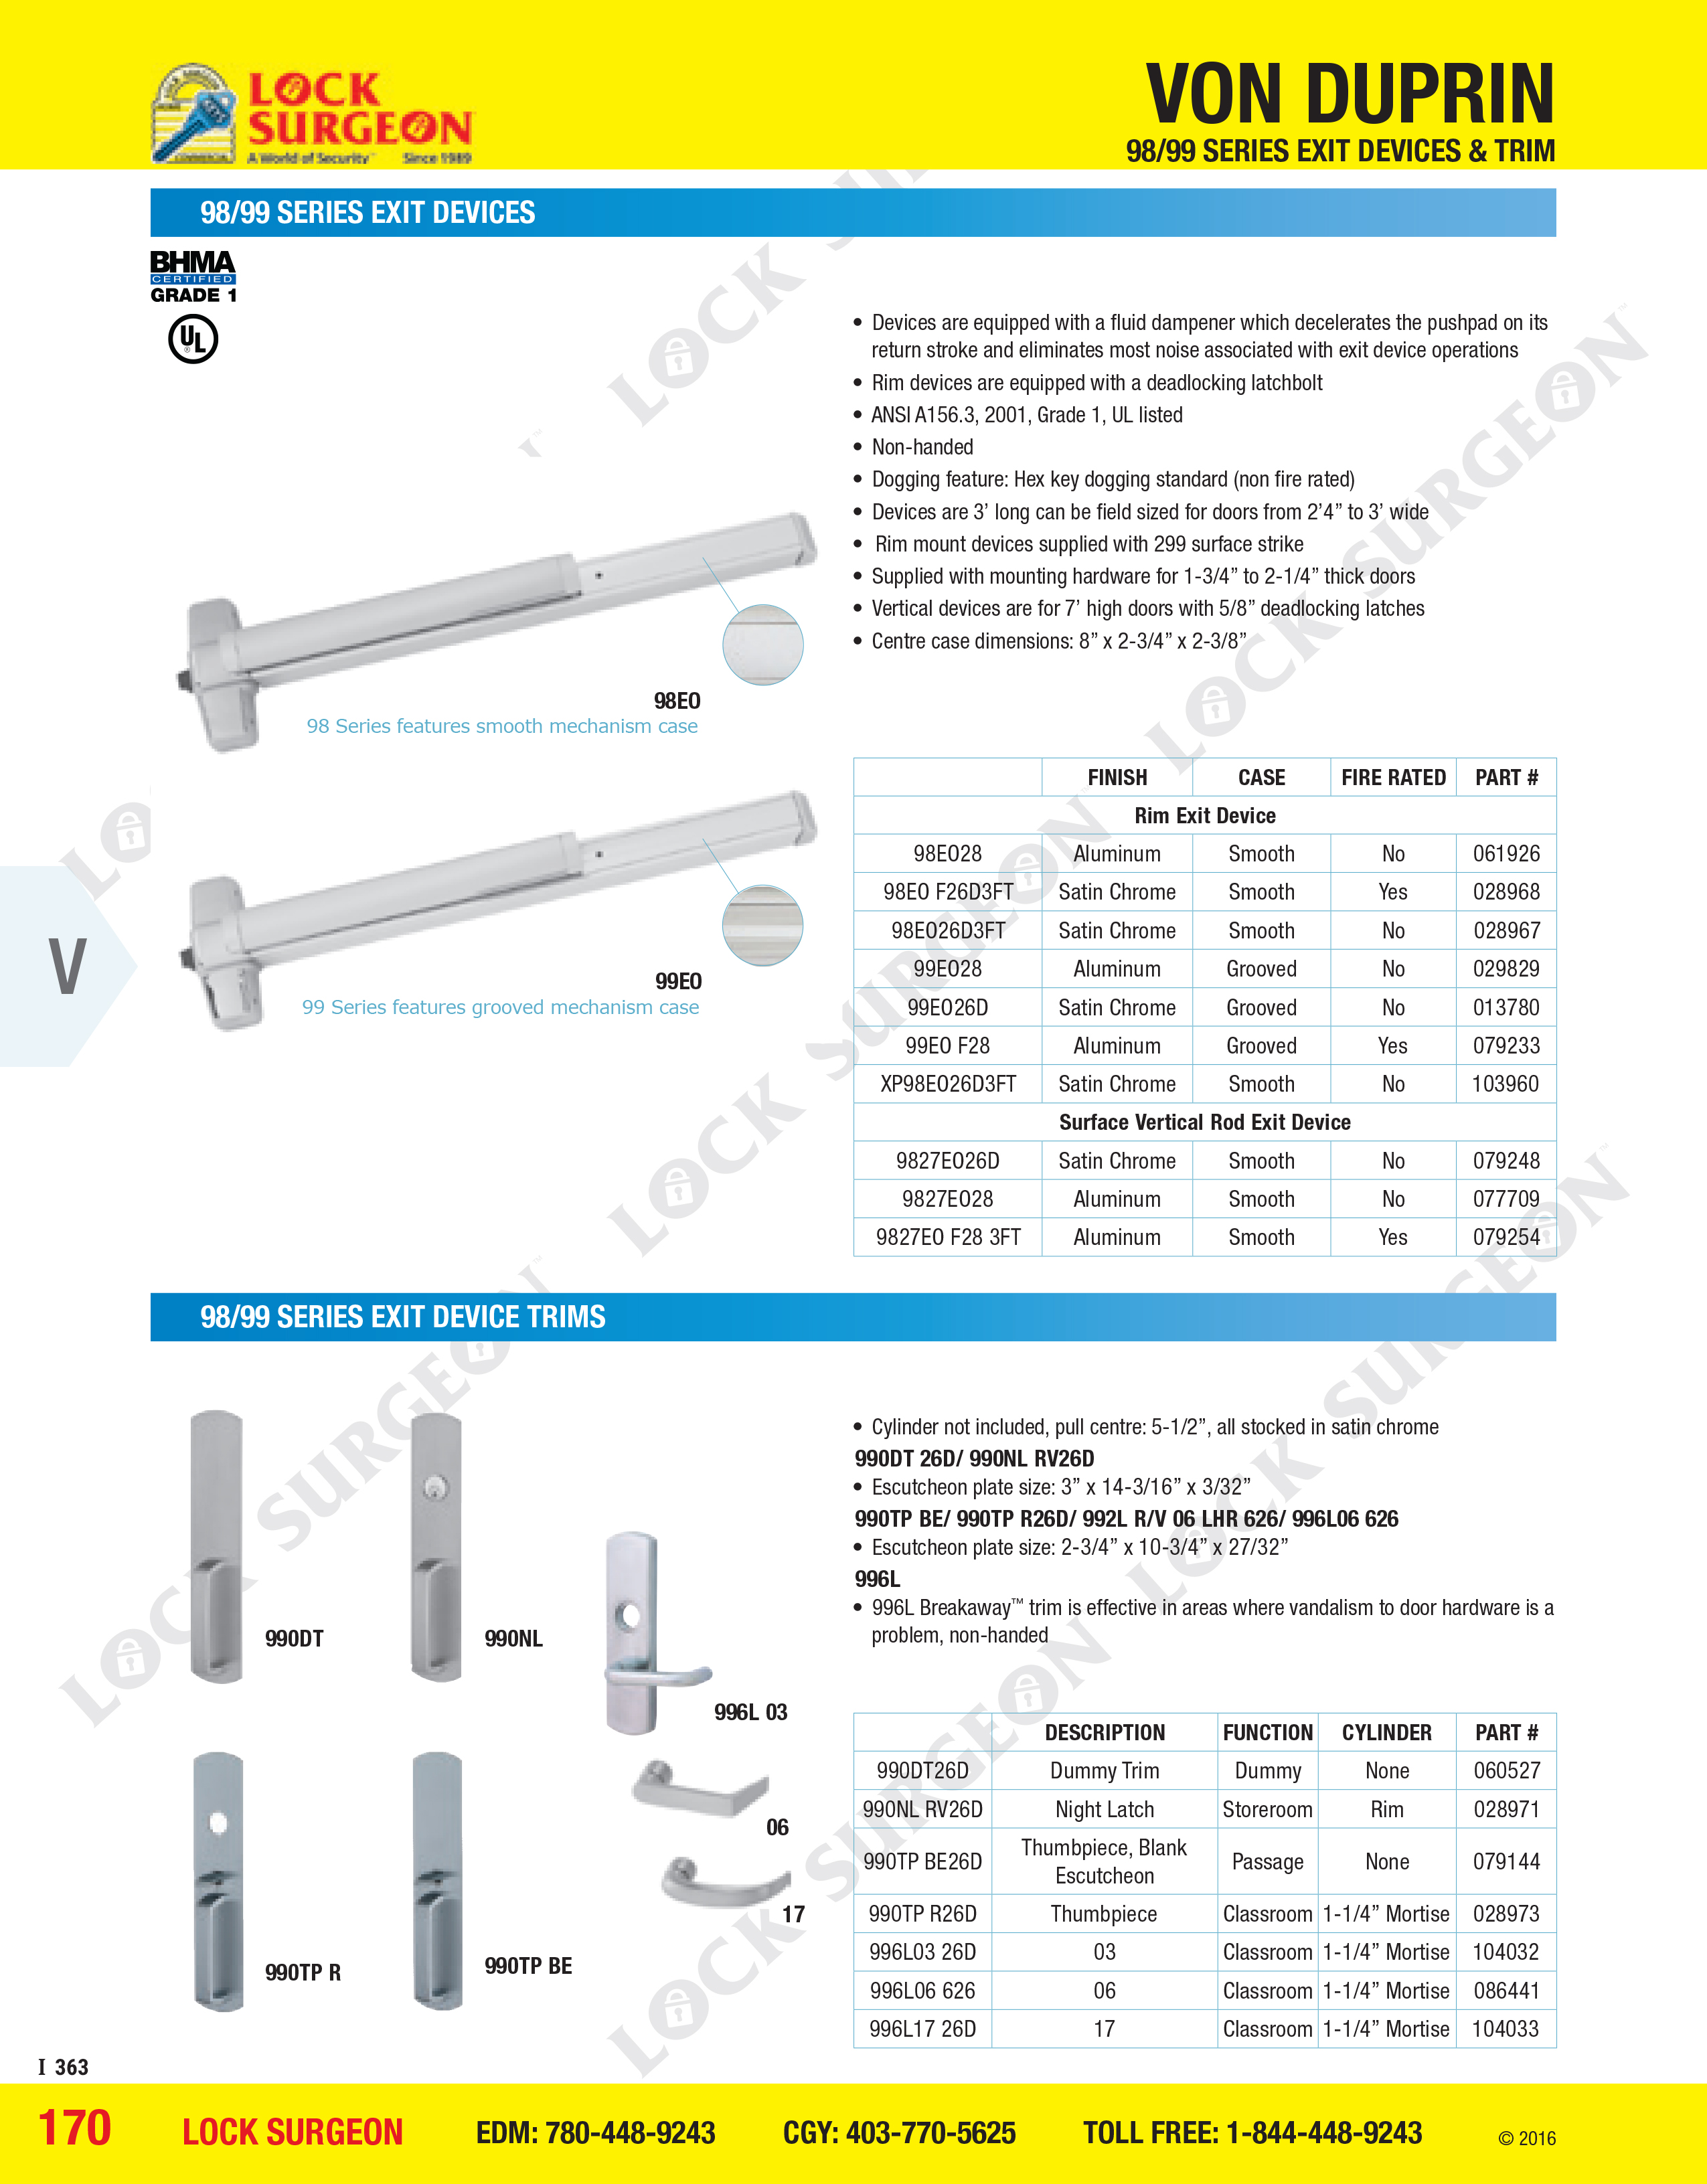 Grade 1 Panic bar, Von Duprin 98 and 99 series exit device and trim are made to last